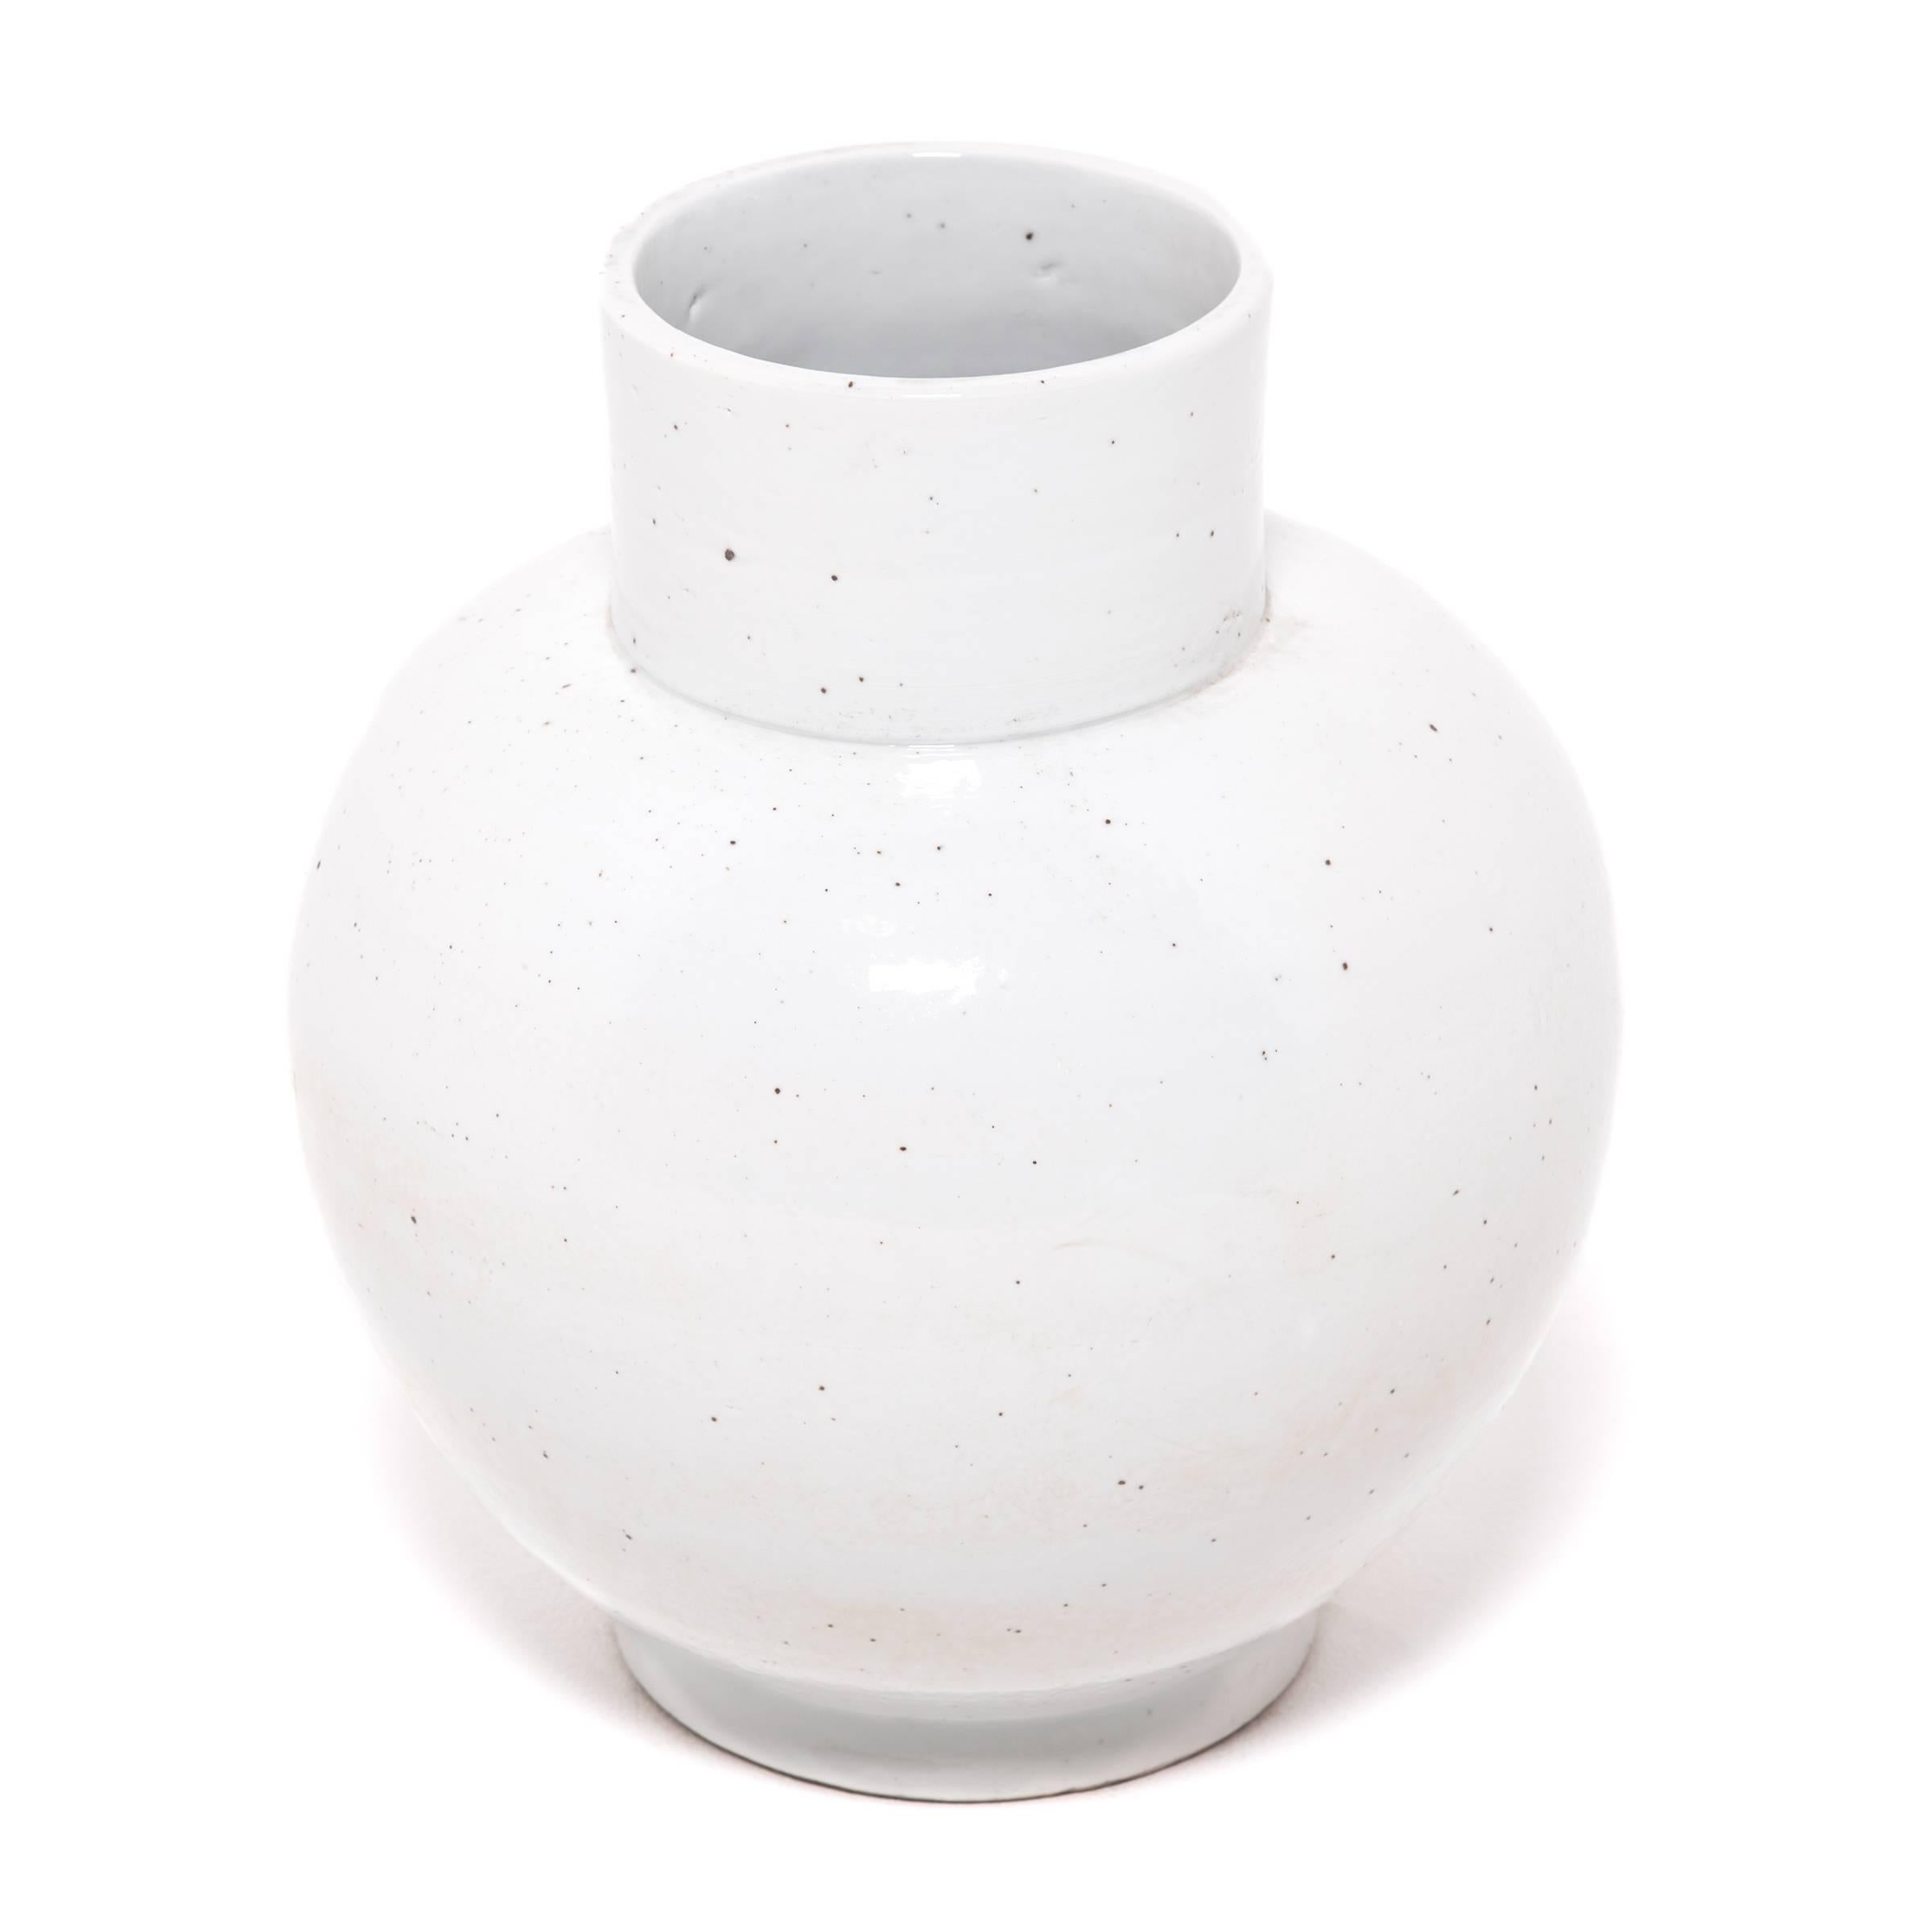 The location of a 2,000-year-old ceramics industry, Jiangxi province is experiencing a creative Renaissance, attracting artisans eager to master and expand upon traditional ceramic techniques and forms. This charming vase, for example, updates the